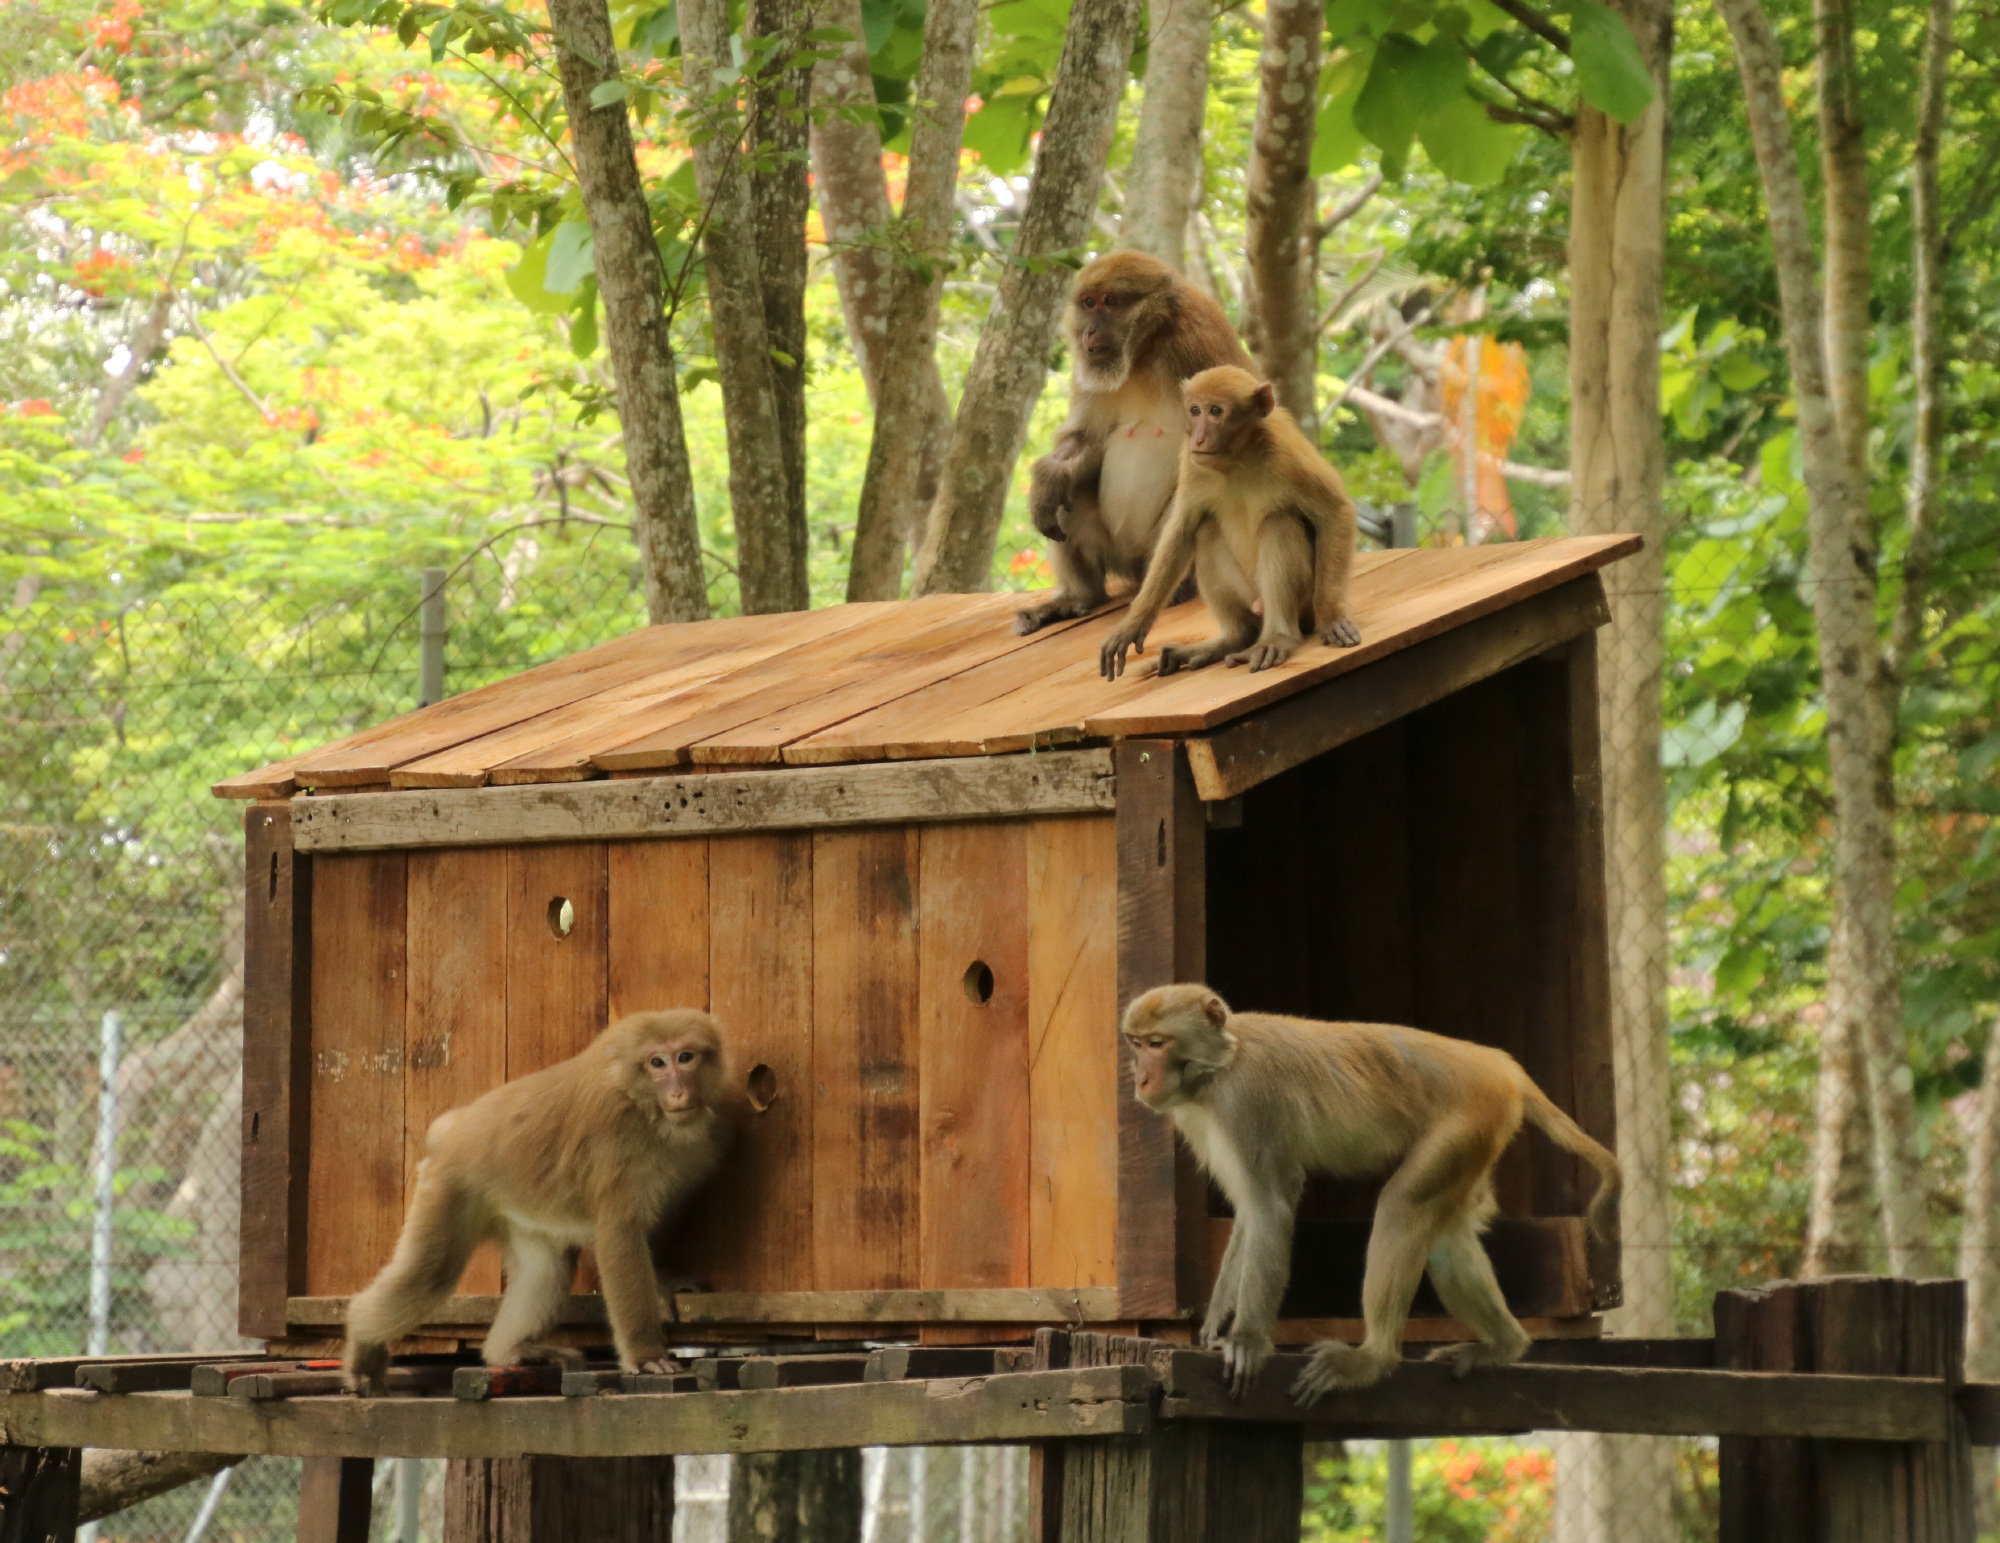 Macaques explore their new wooden house